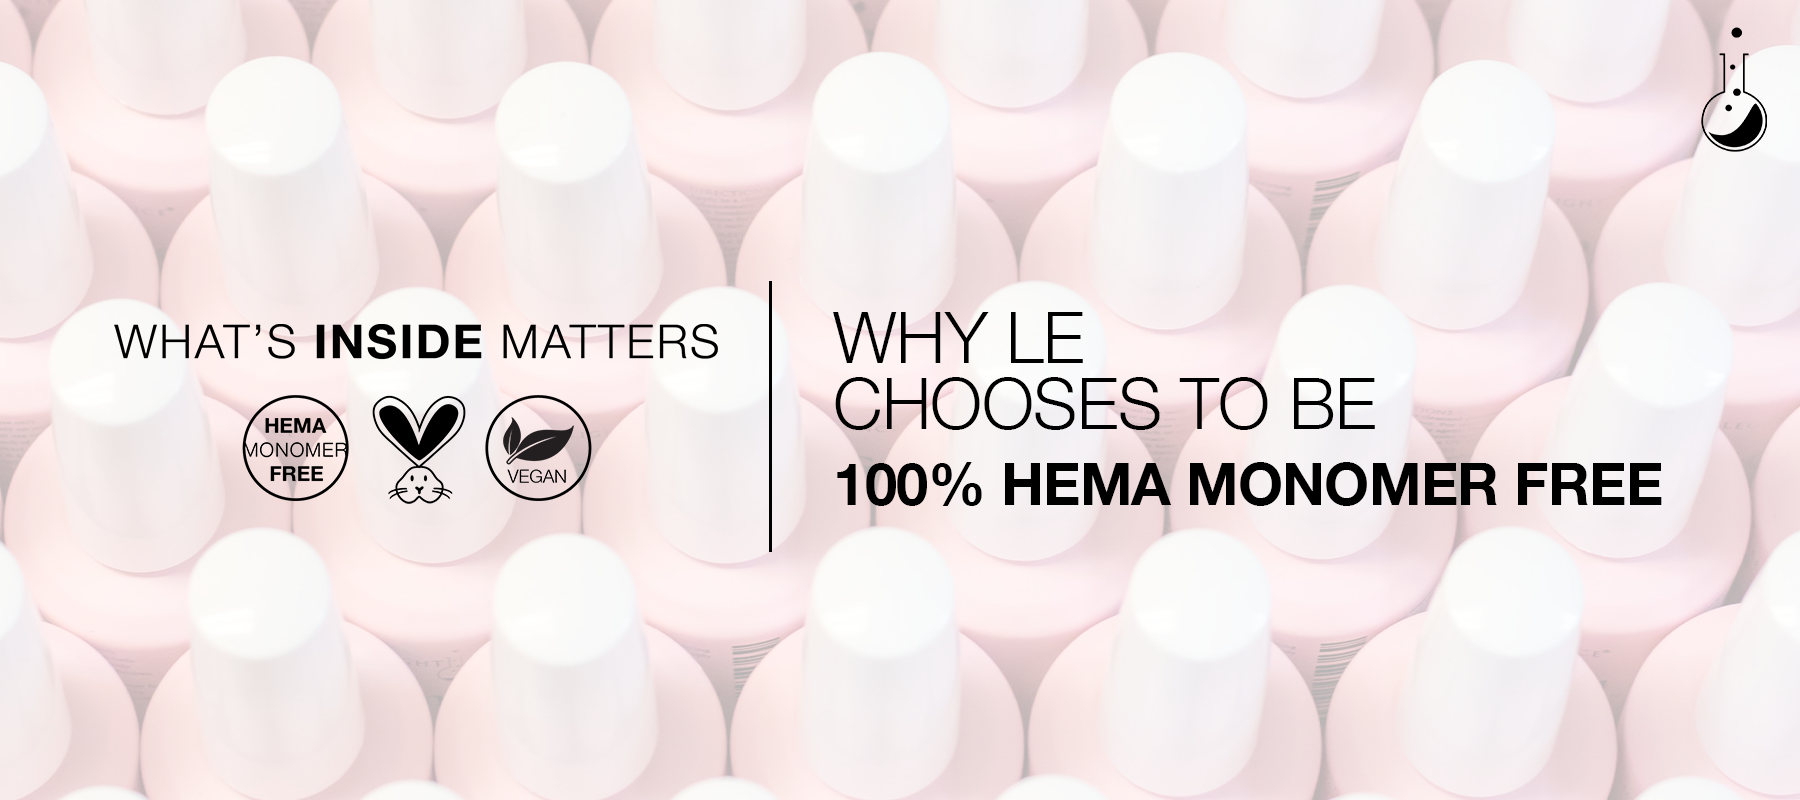 Why LE Chooses to be HEMA Free | HEMA Free Gel Nail Products Made in the USA